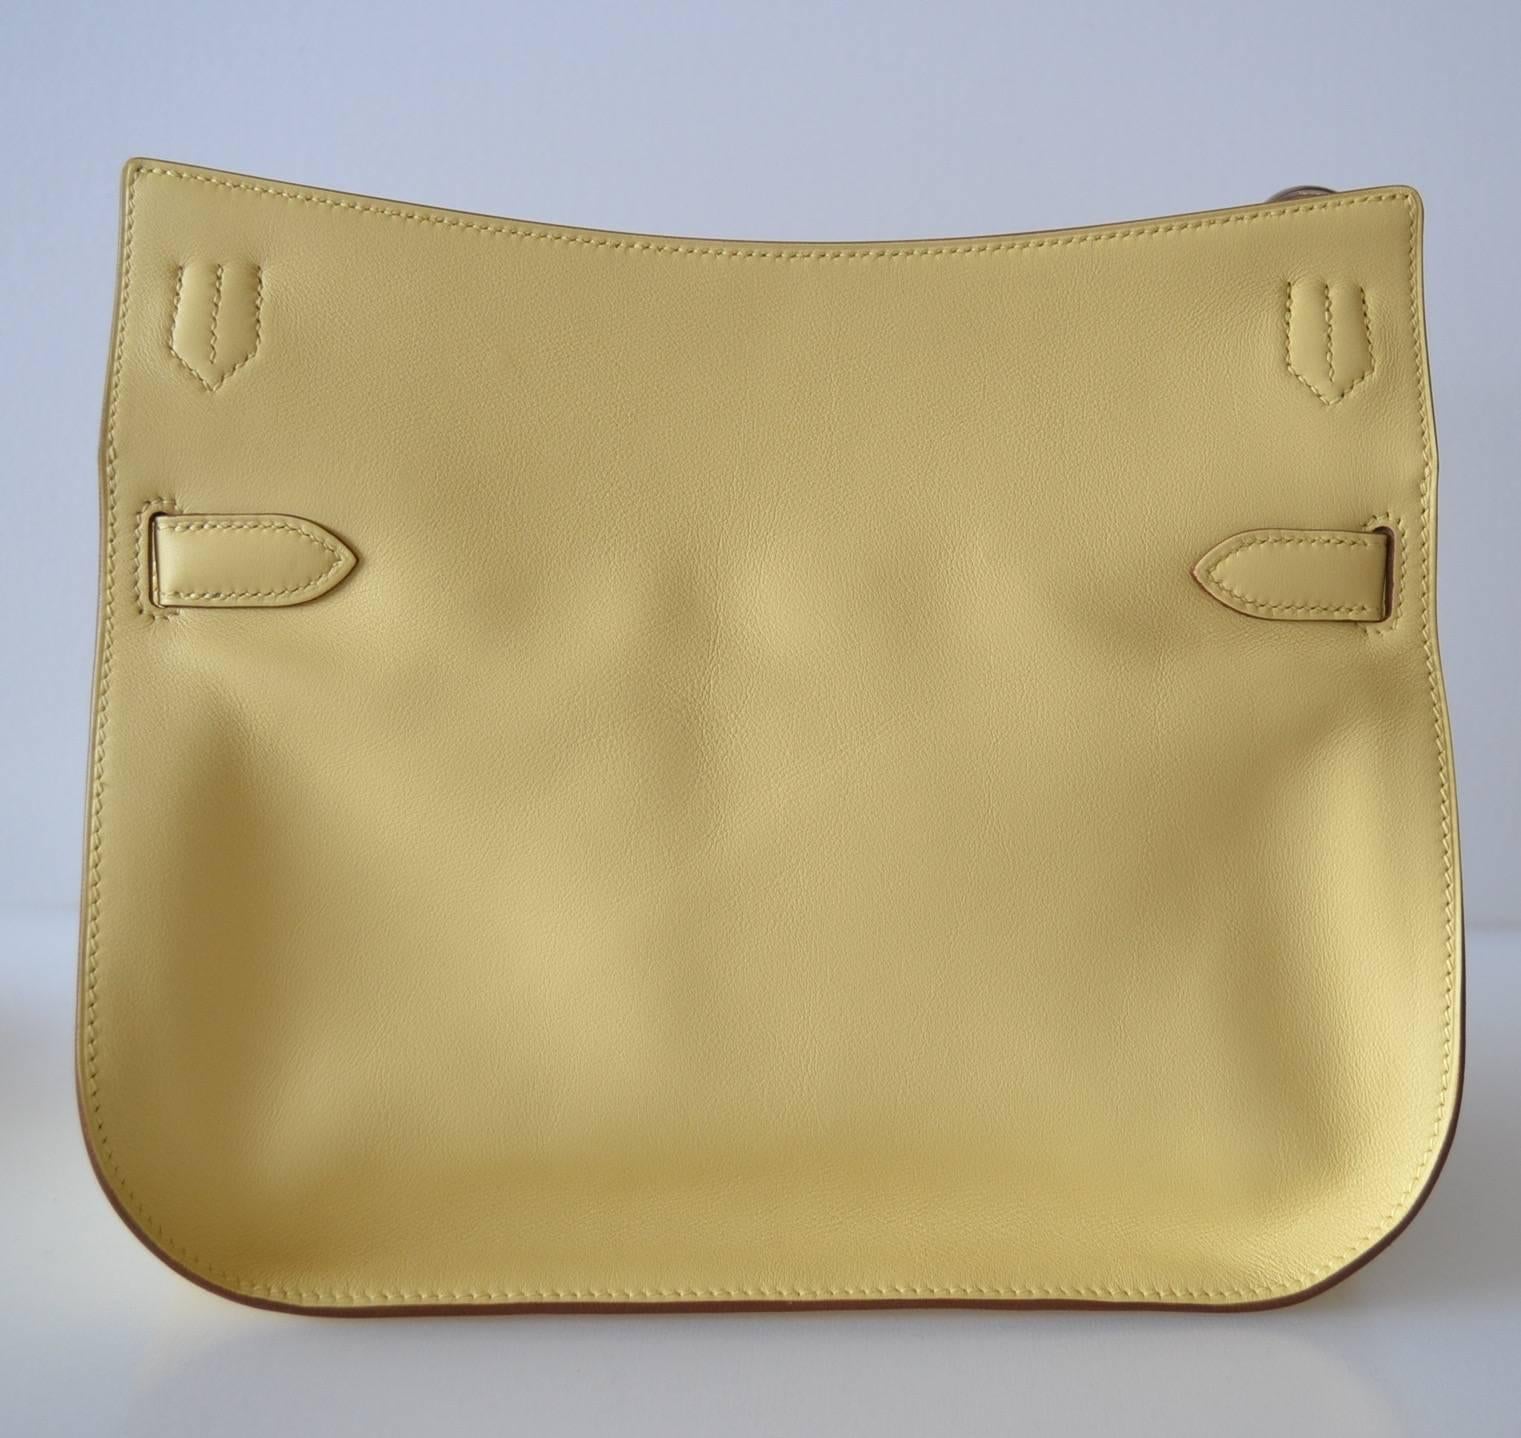 Hermes Jypsiere Swift Jaune Poussin
 
Jypsiere is a crossbody model 
Swift leather
Jaune Poussin color  (yellow)
Palladium hardware
 
As new condition – Never used - Plastics removed
 
This Lindy has a Sales number under “Made In France”.